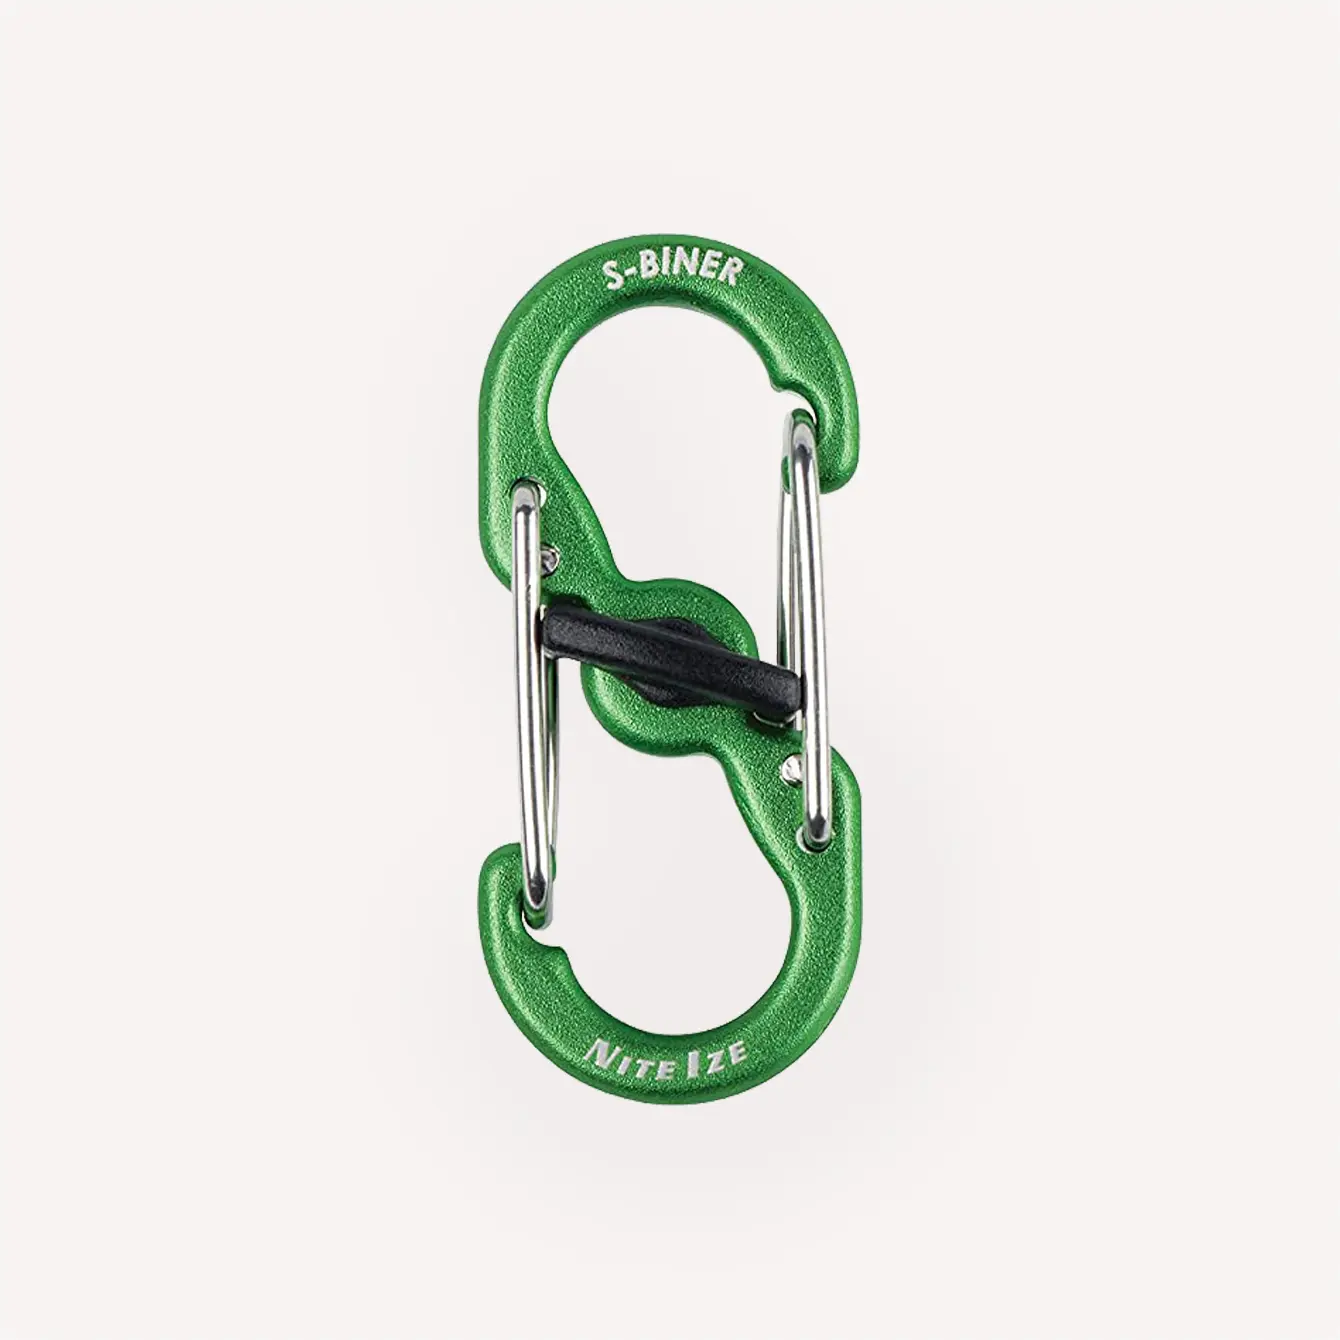 SZHOWORLD® Everyday Keychain System Key Organizer 5 Strong Alloy Quick Release Carabiner Clips